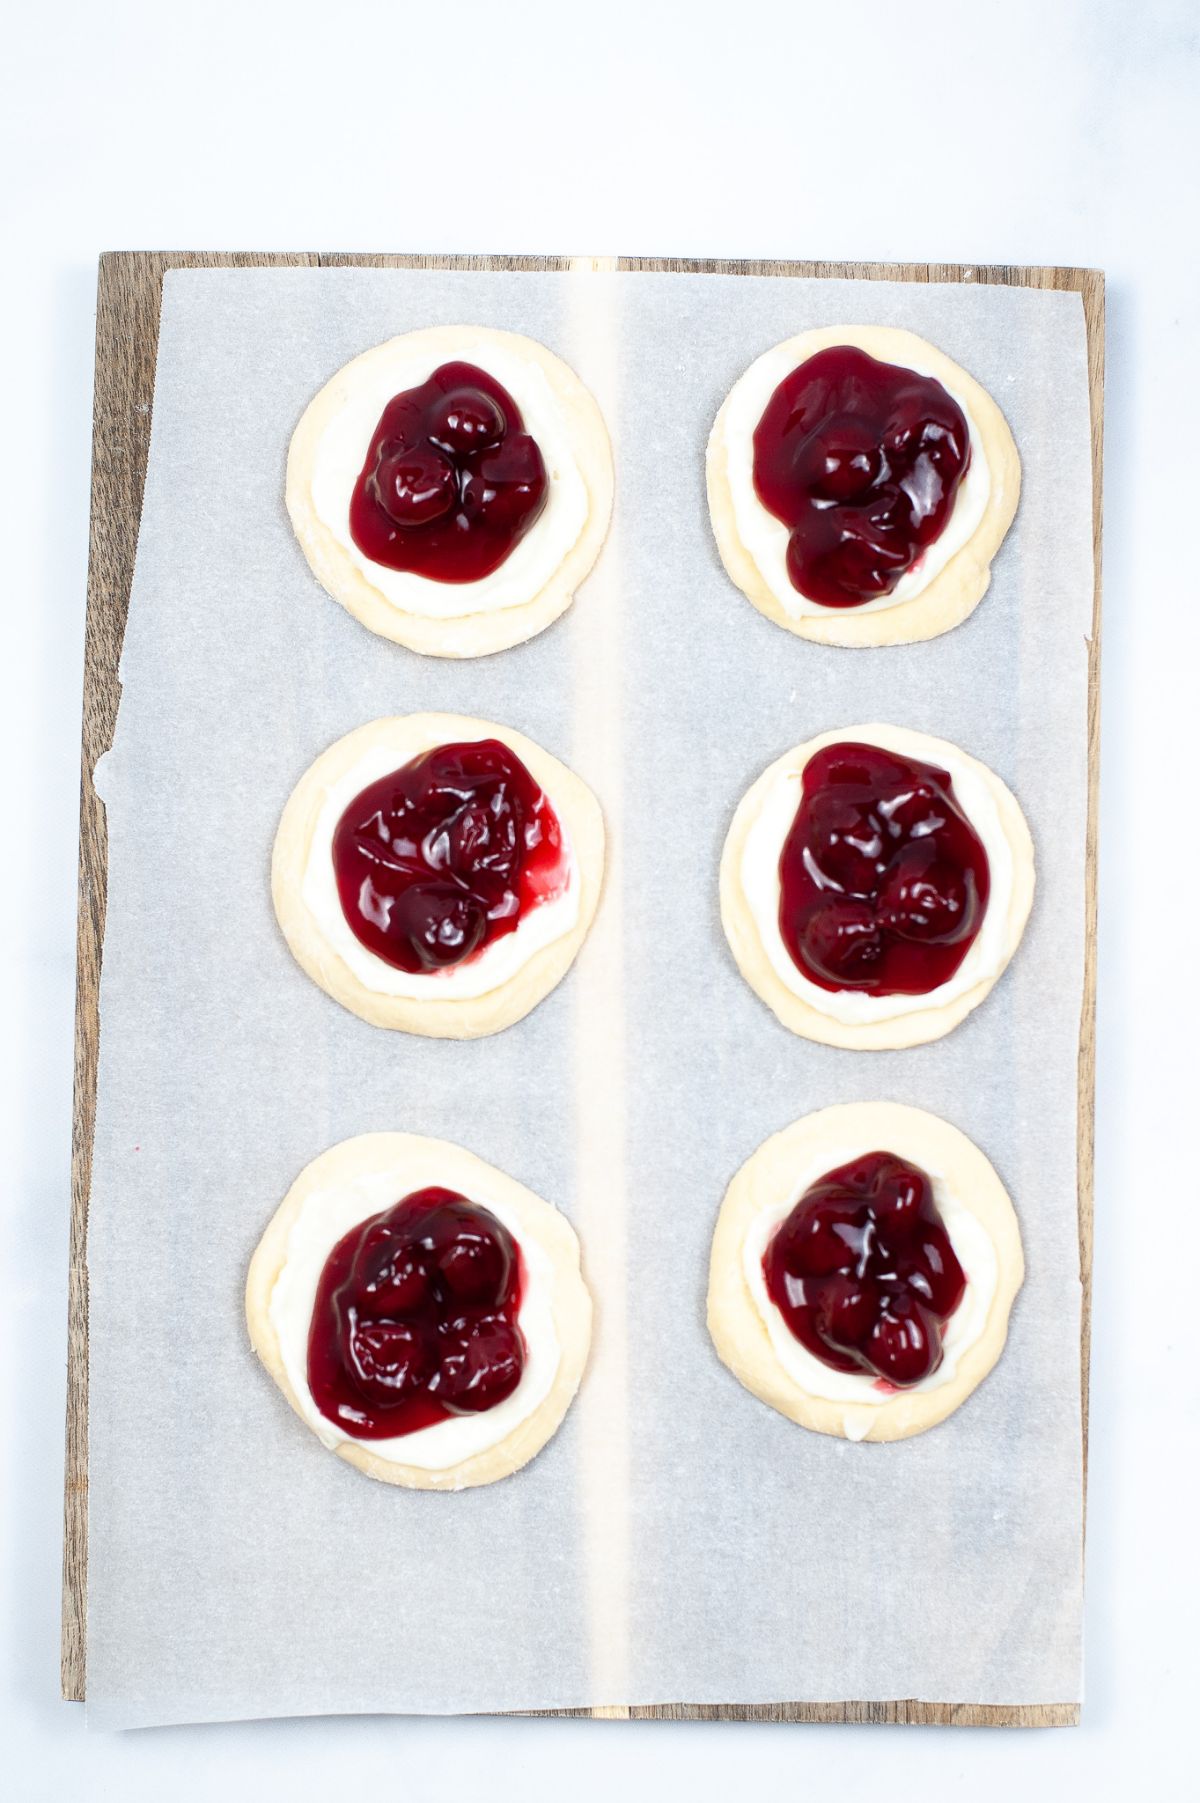 6 pcs Danish dough flattened in 2-3" circle size topped with cream cheese mixture and cherries.